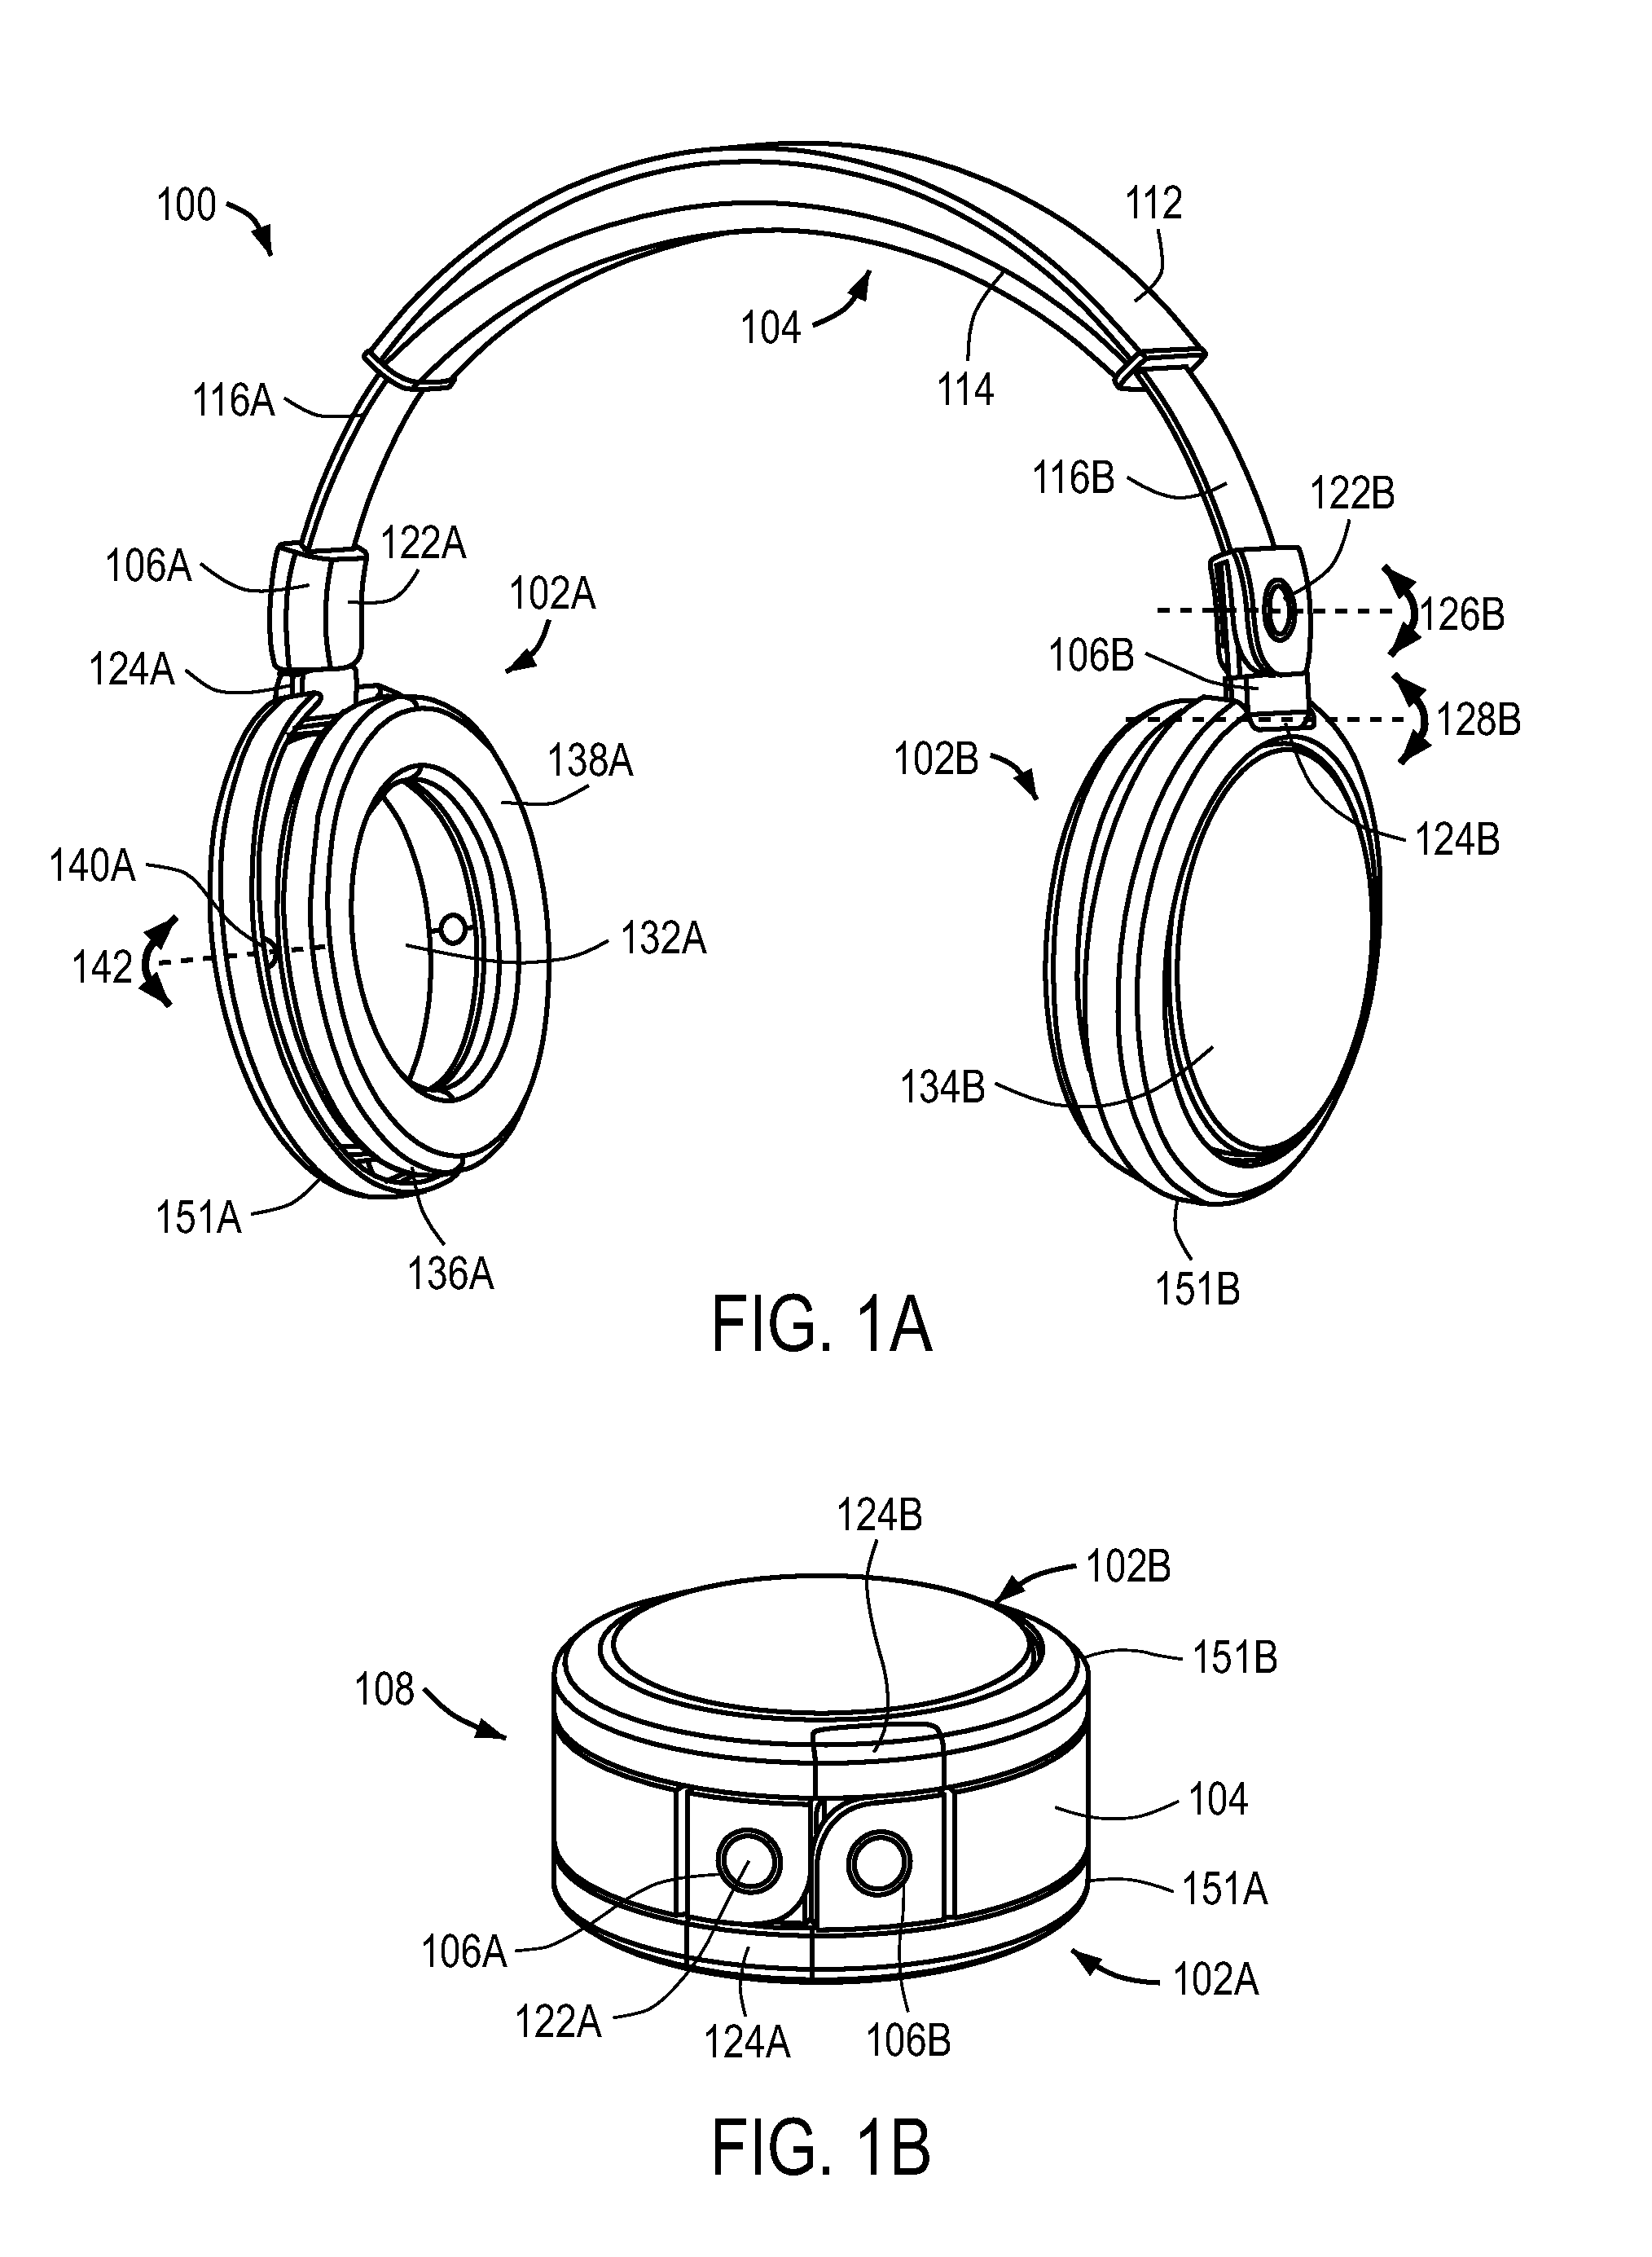 Collapsible headphone